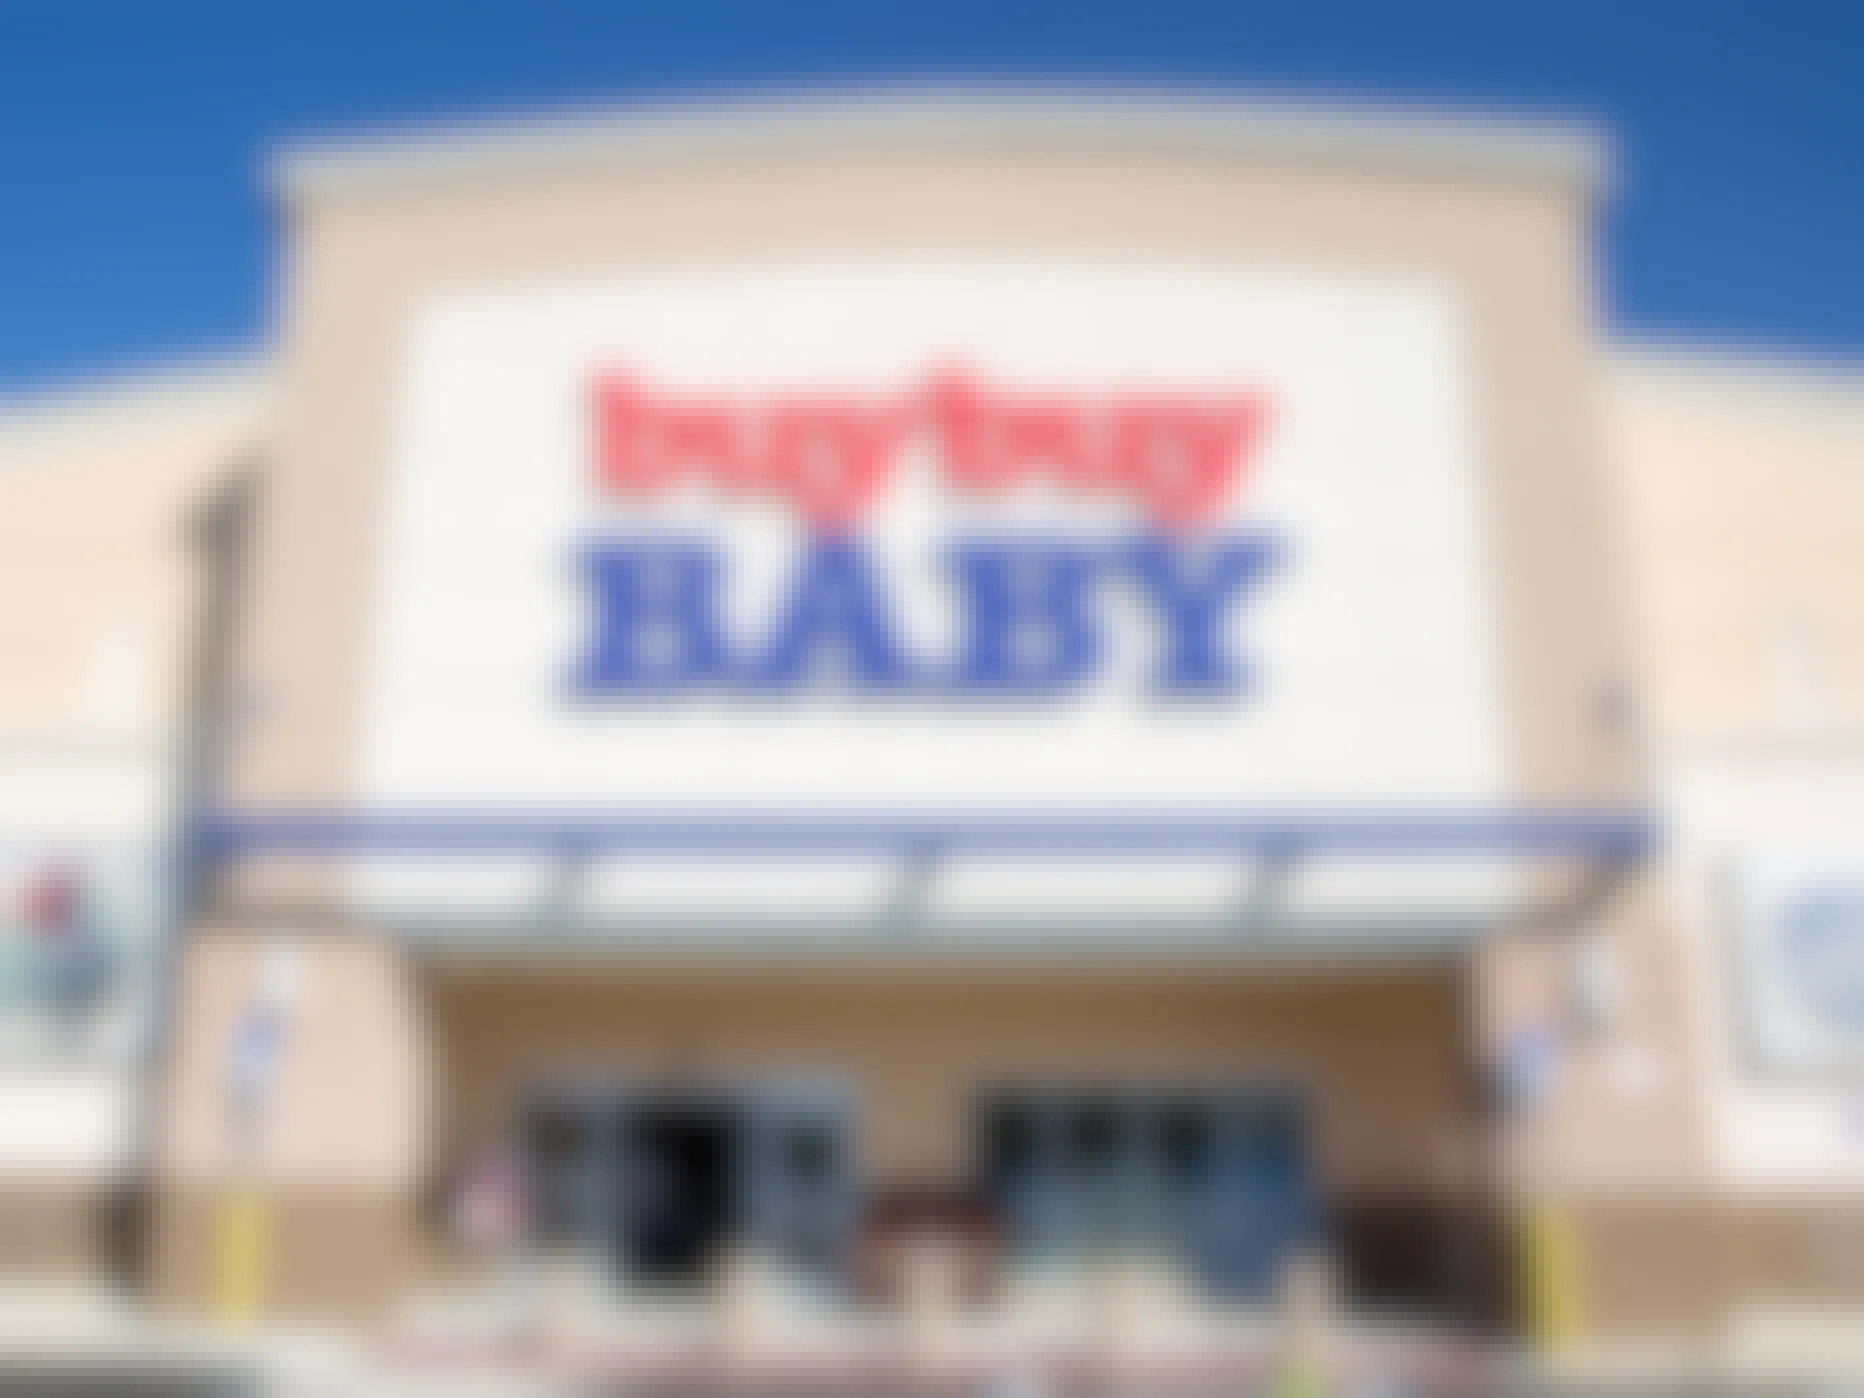 buybuy Baby store exterior